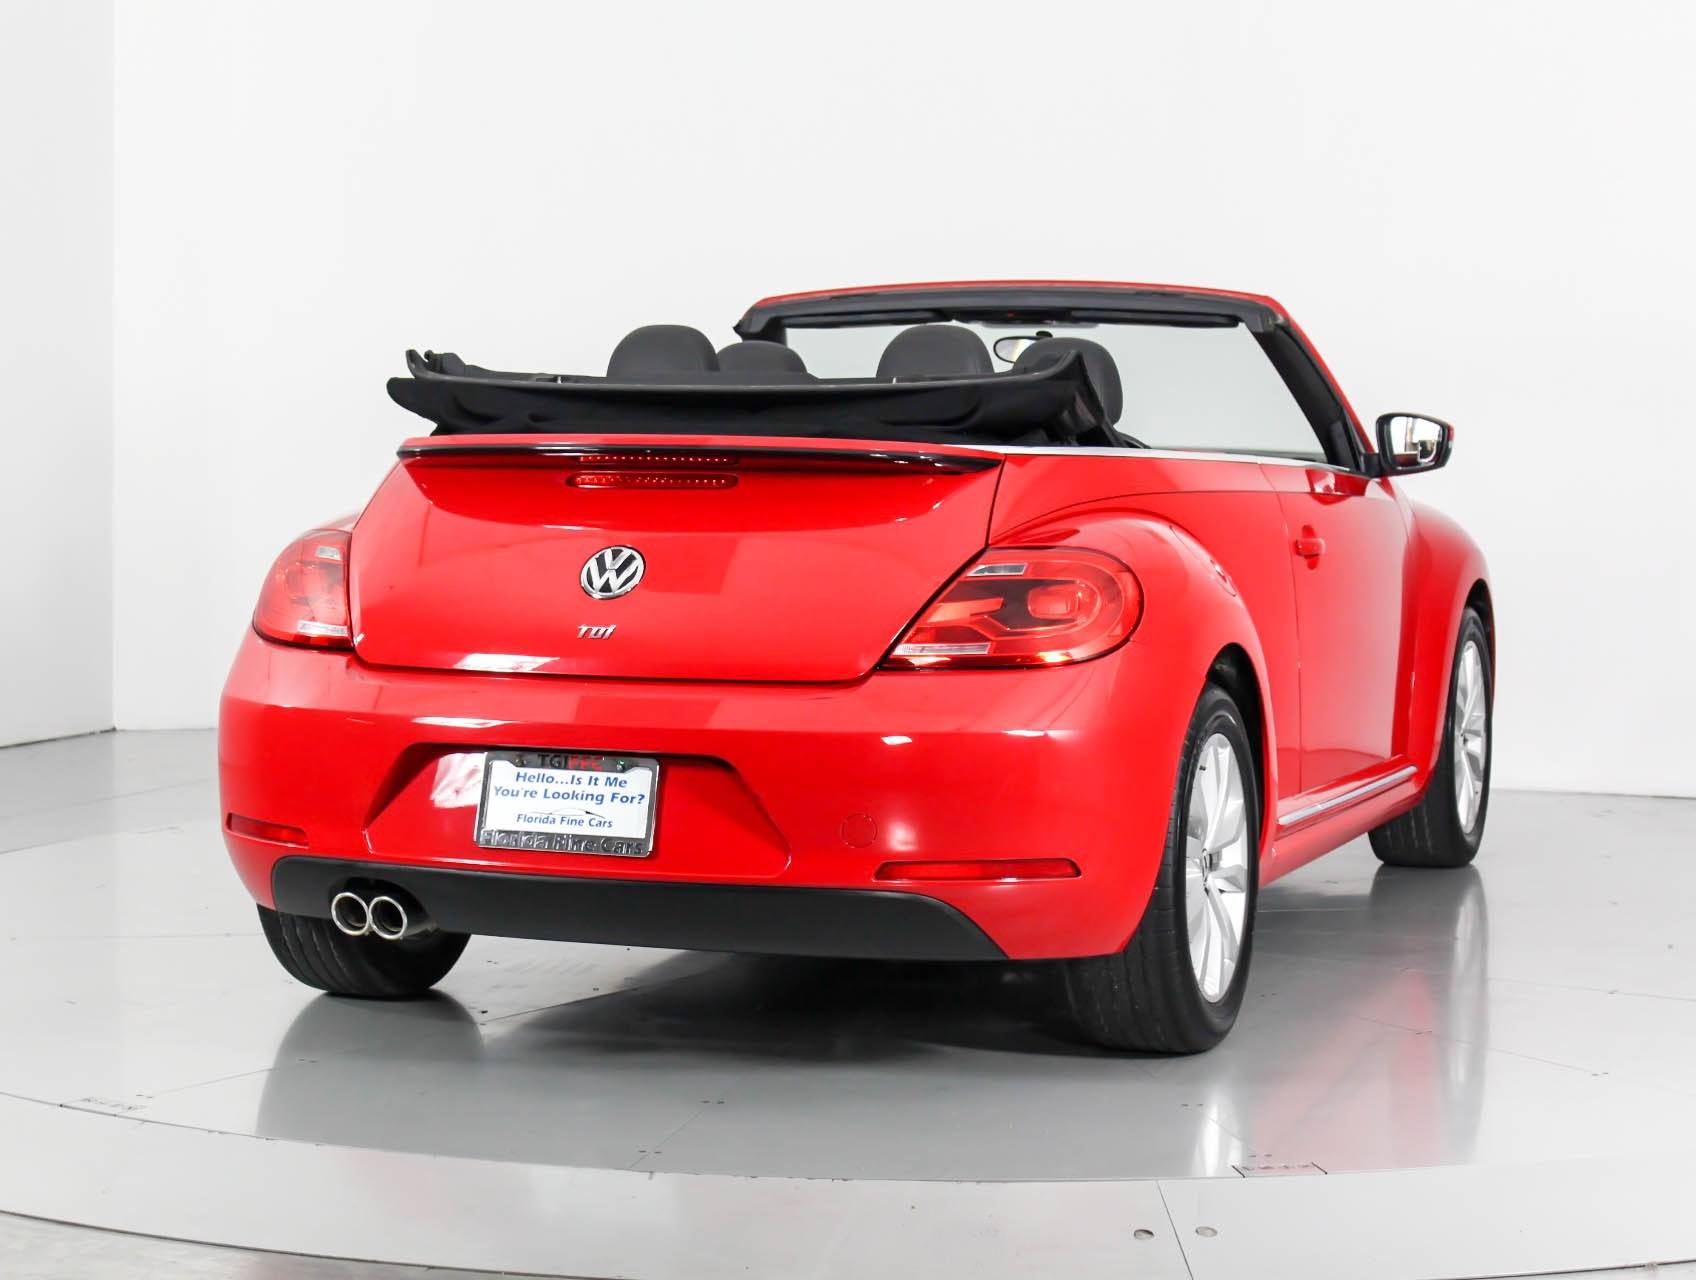 Florida Fine Cars - Used VOLKSWAGEN BEETLE 2014 WEST PALM CONVERTIBLE TDI